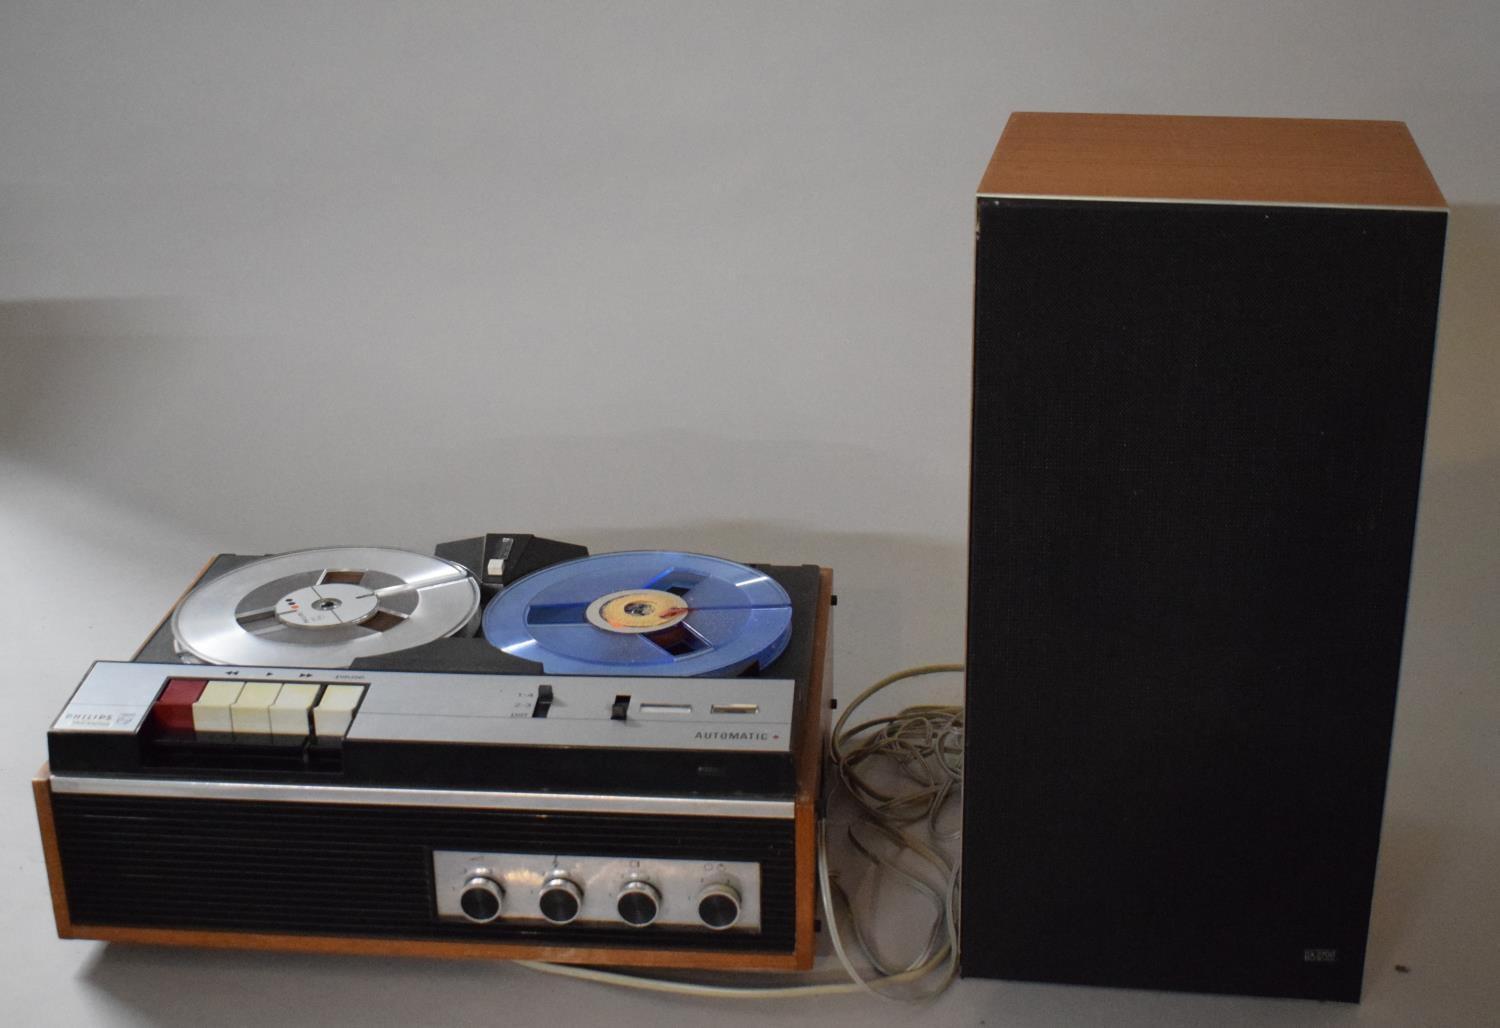 A Philips Automatic Reel-to-Reel Tape Recorder Together with Speaker